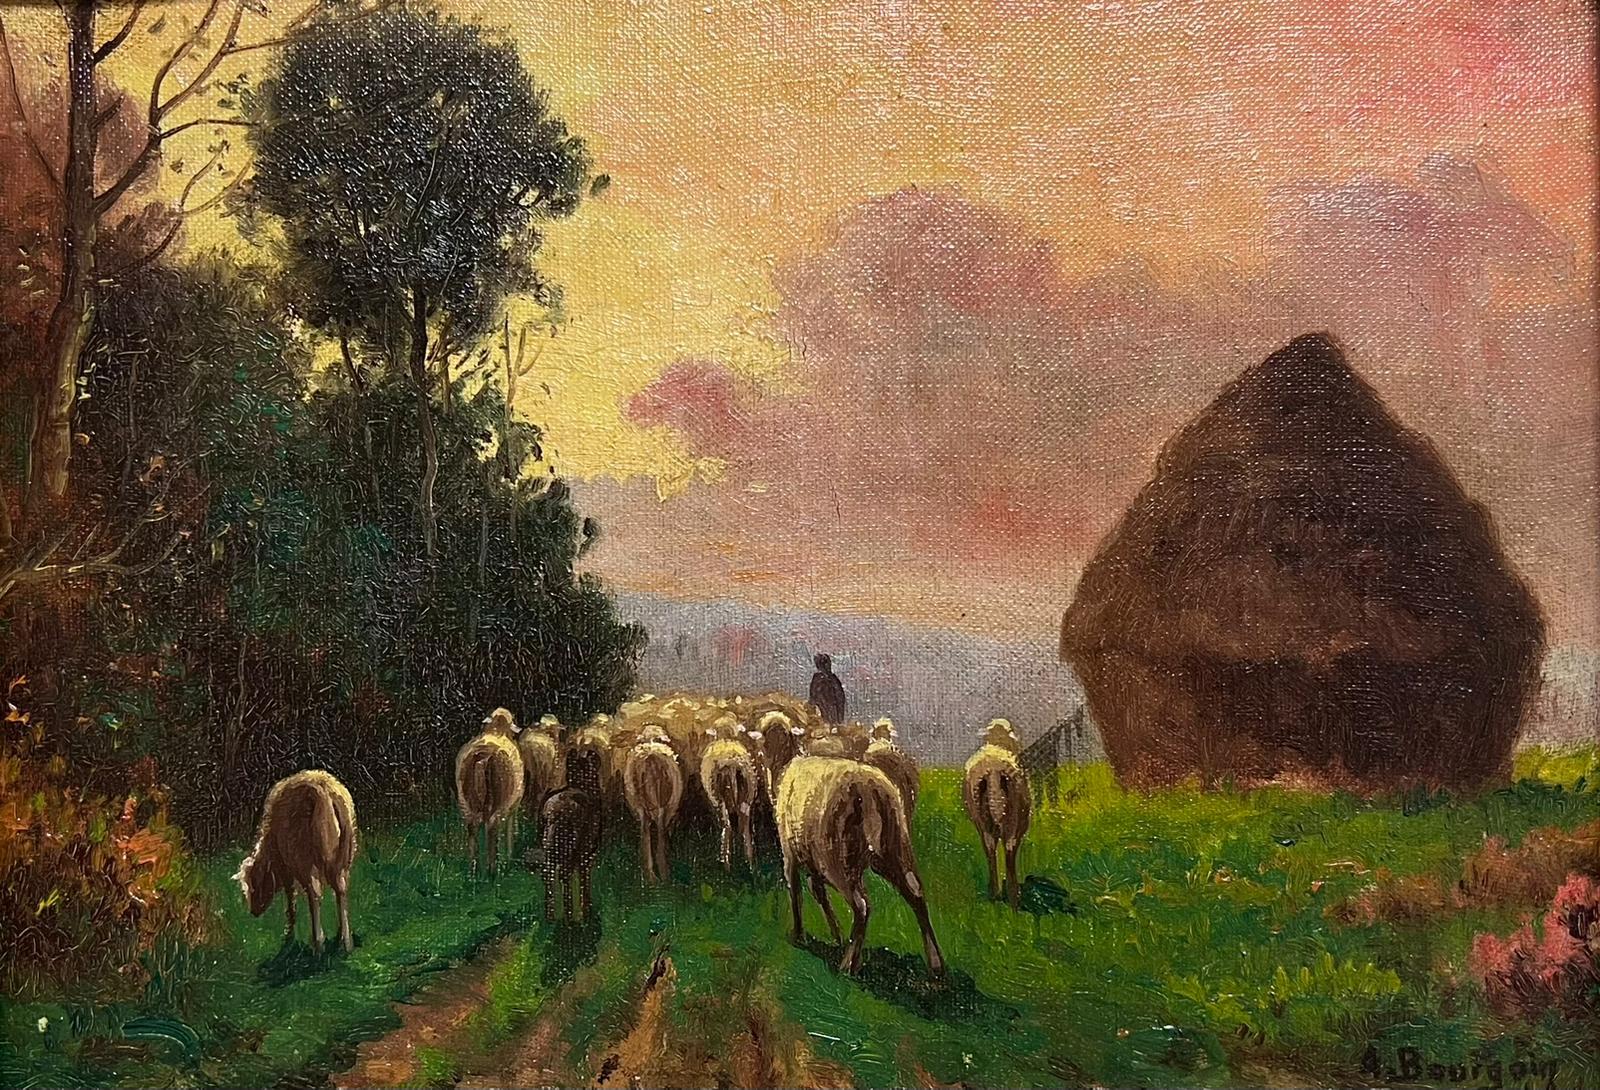 Haystack at Sunset
French Impressionist artist, late 19th century
signed oil on canvas, framed 
framed: 13 x 16.5
canvas: 9.5 x 13  inches
provenance: private collection, France
condition: very good and sound condition